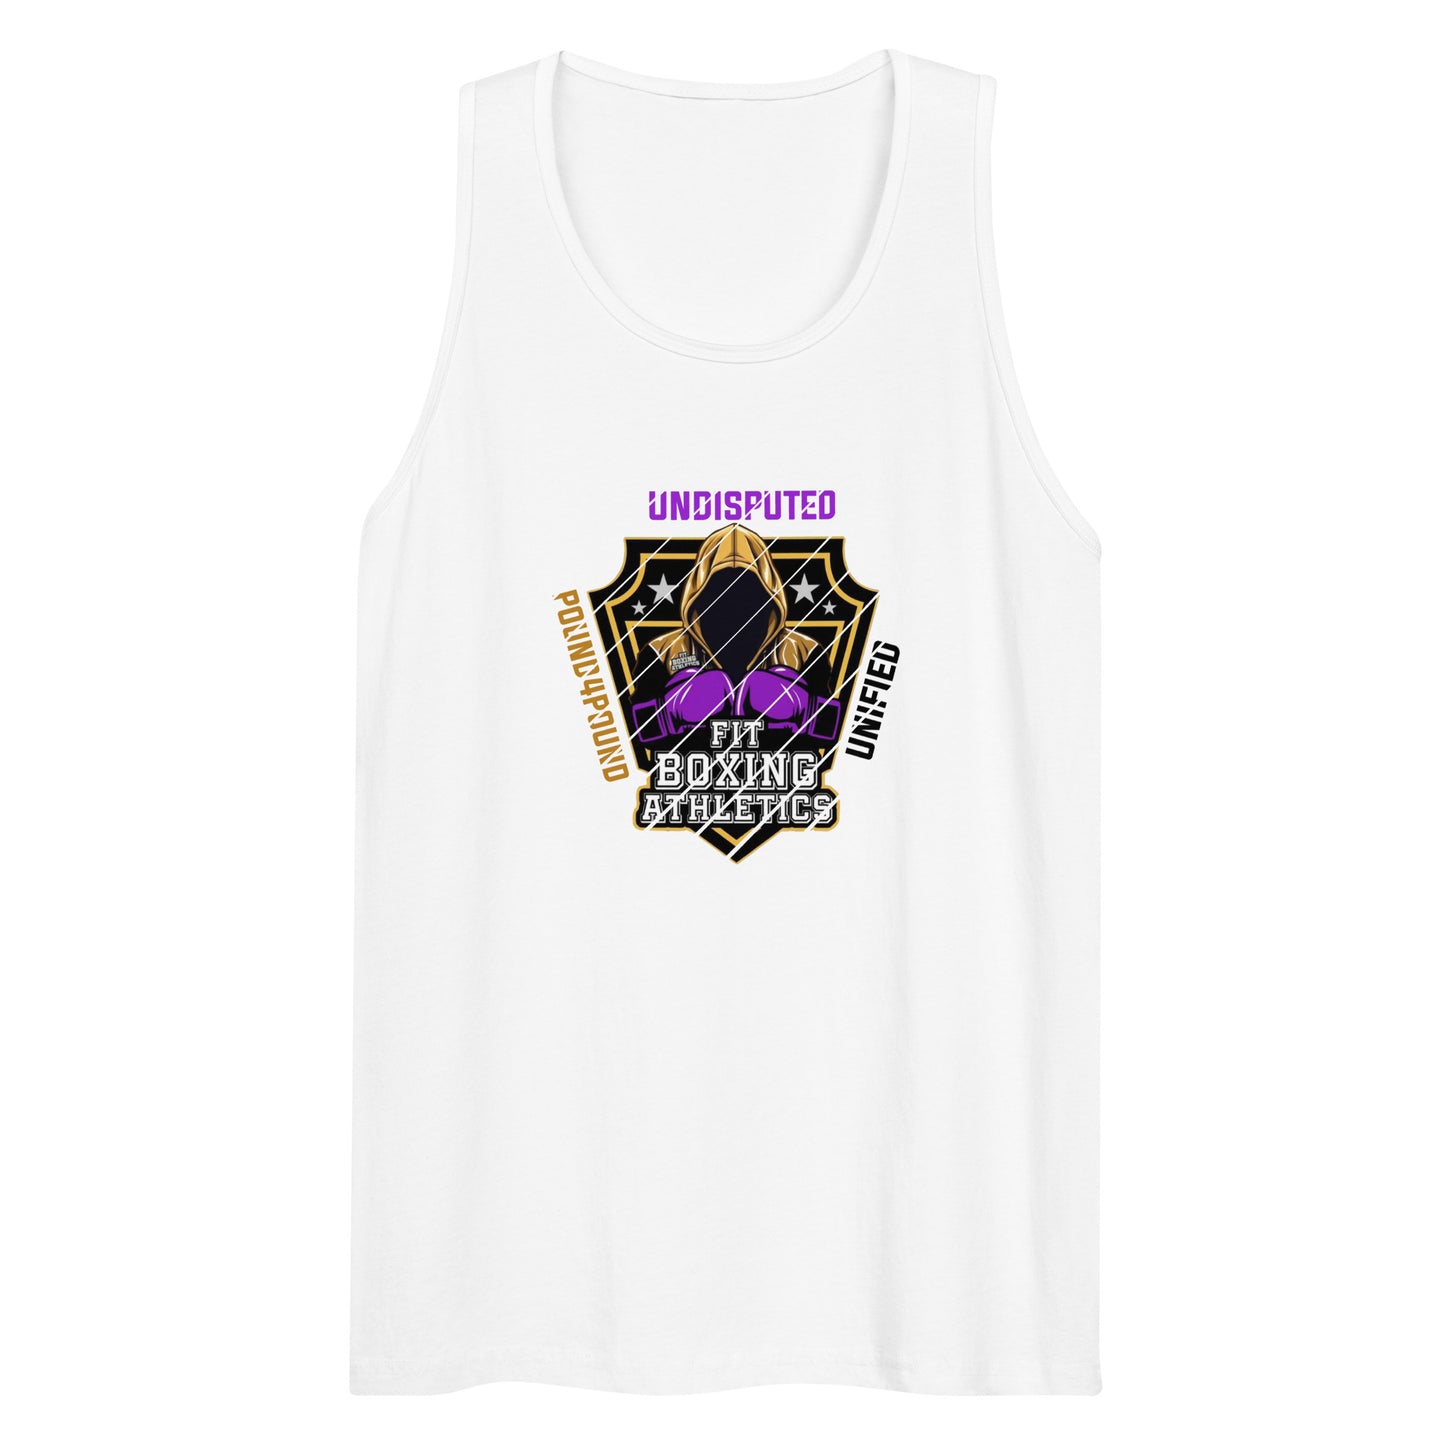 Fit Boxing Athletics Undisputed Tank Top